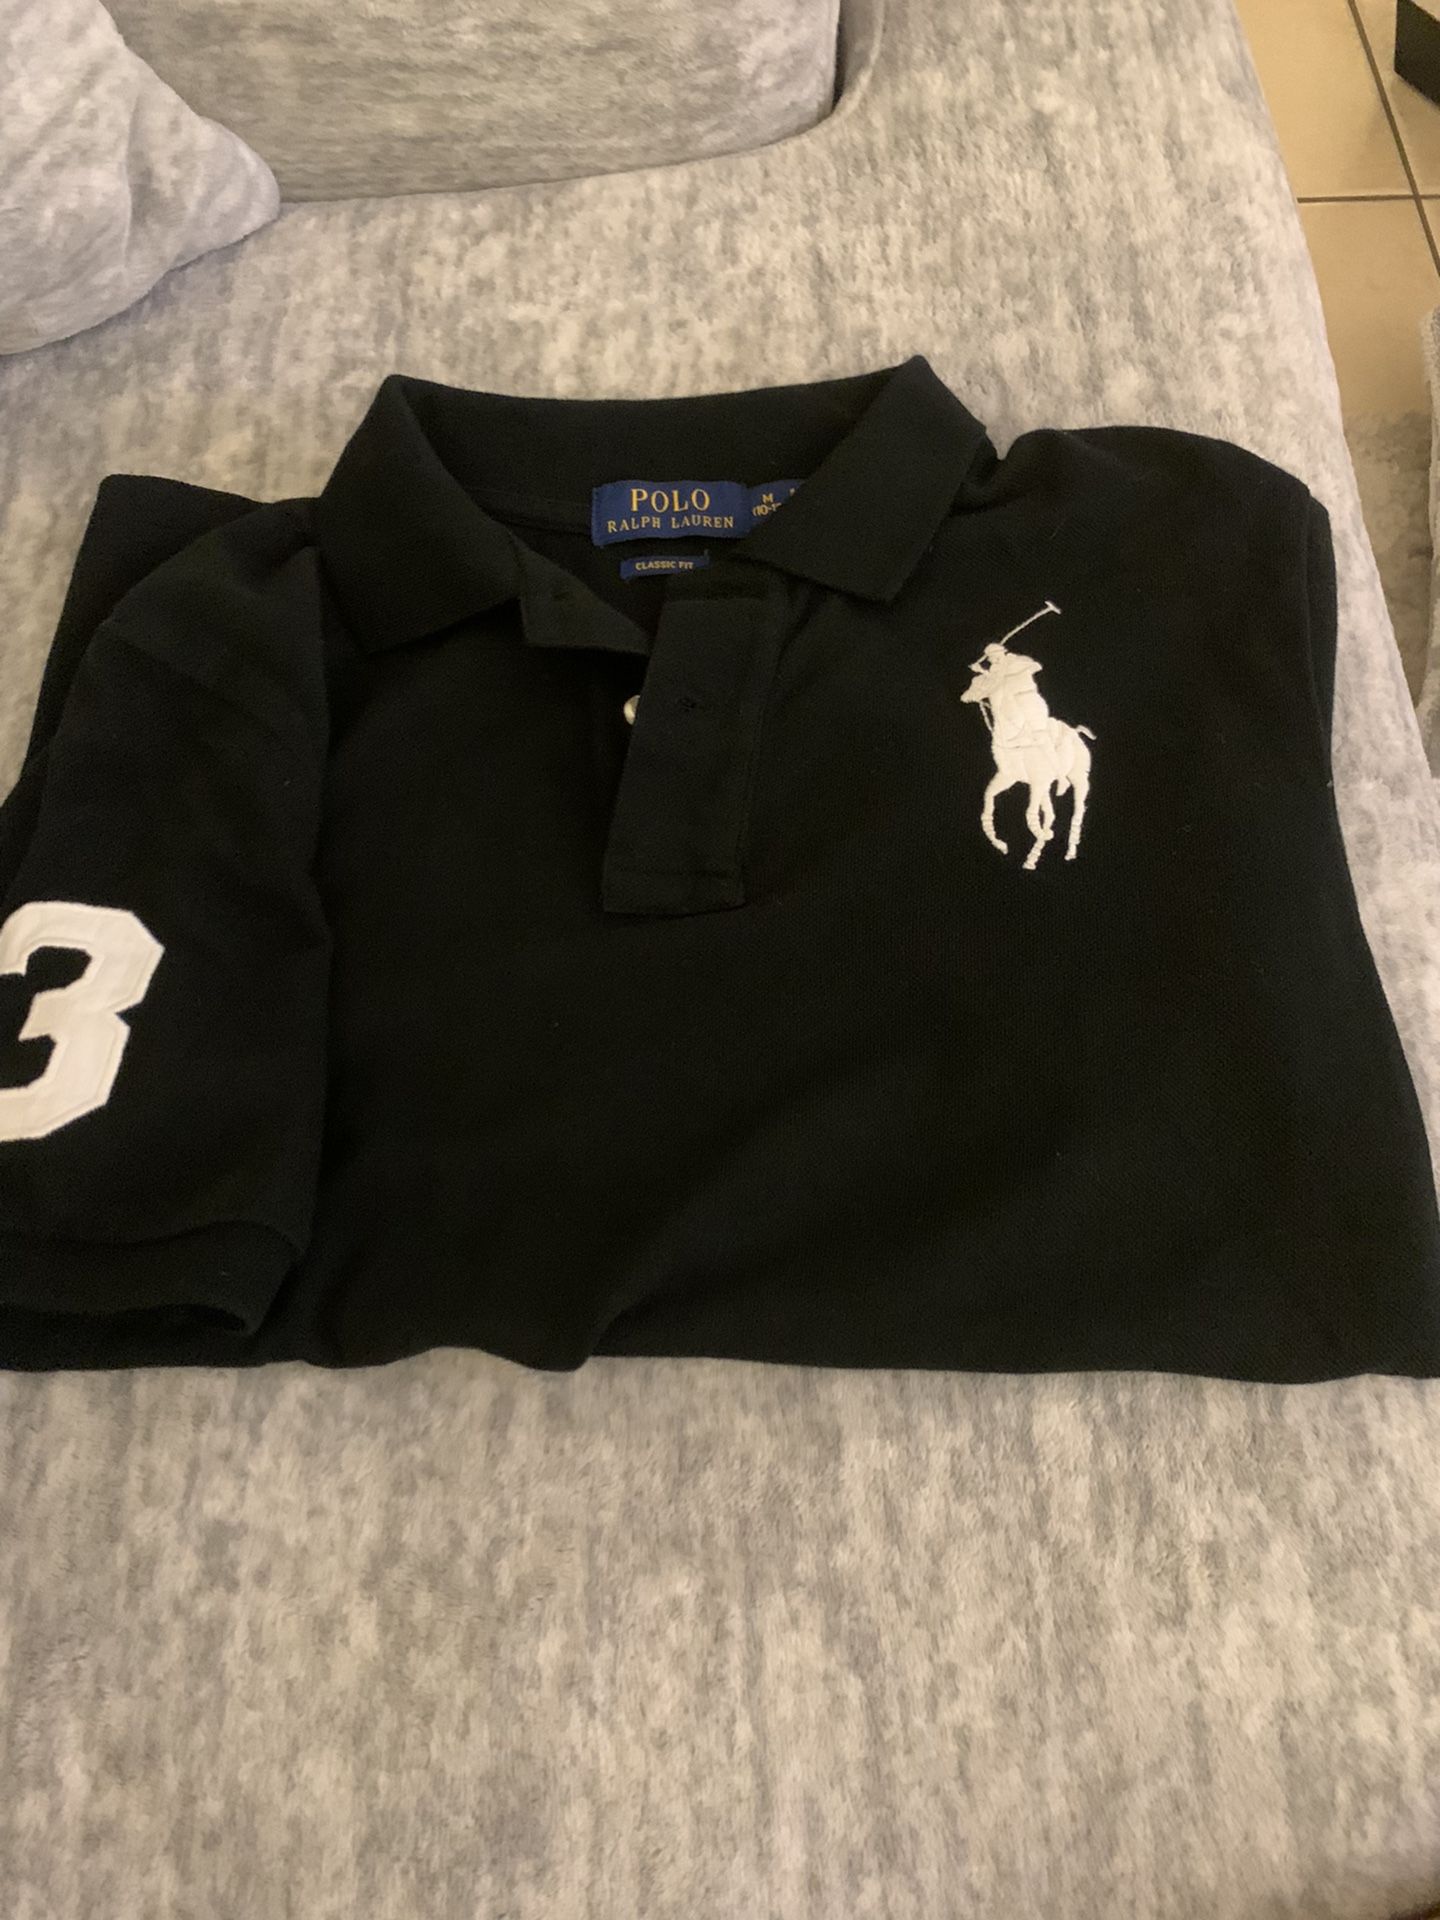 9 Ralph Lauren Polo Shirts Mostly Size 12-14